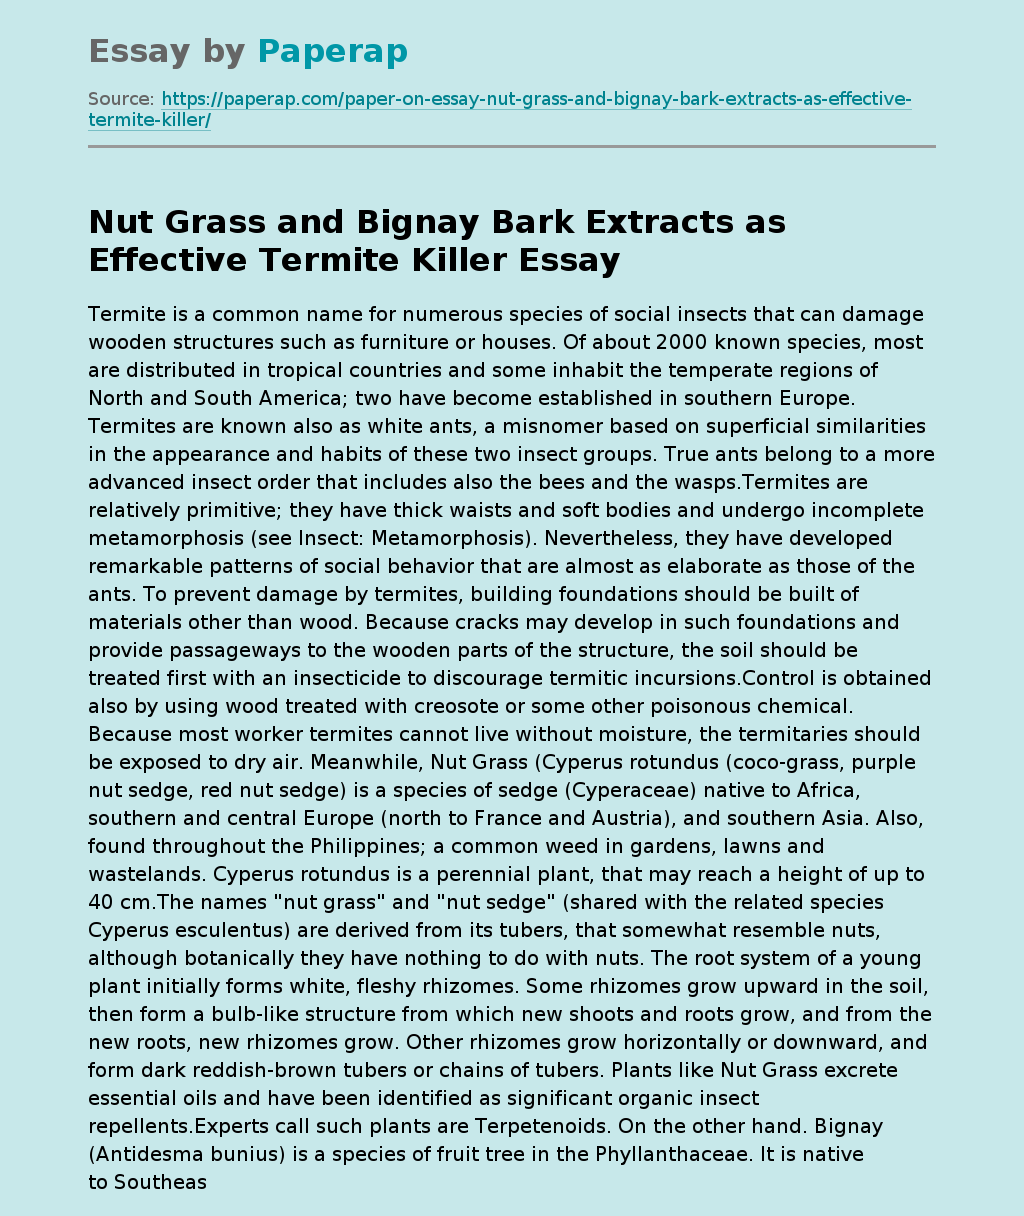 Nut Grass and Bignay Bark Extracts as Effective Termite Killer